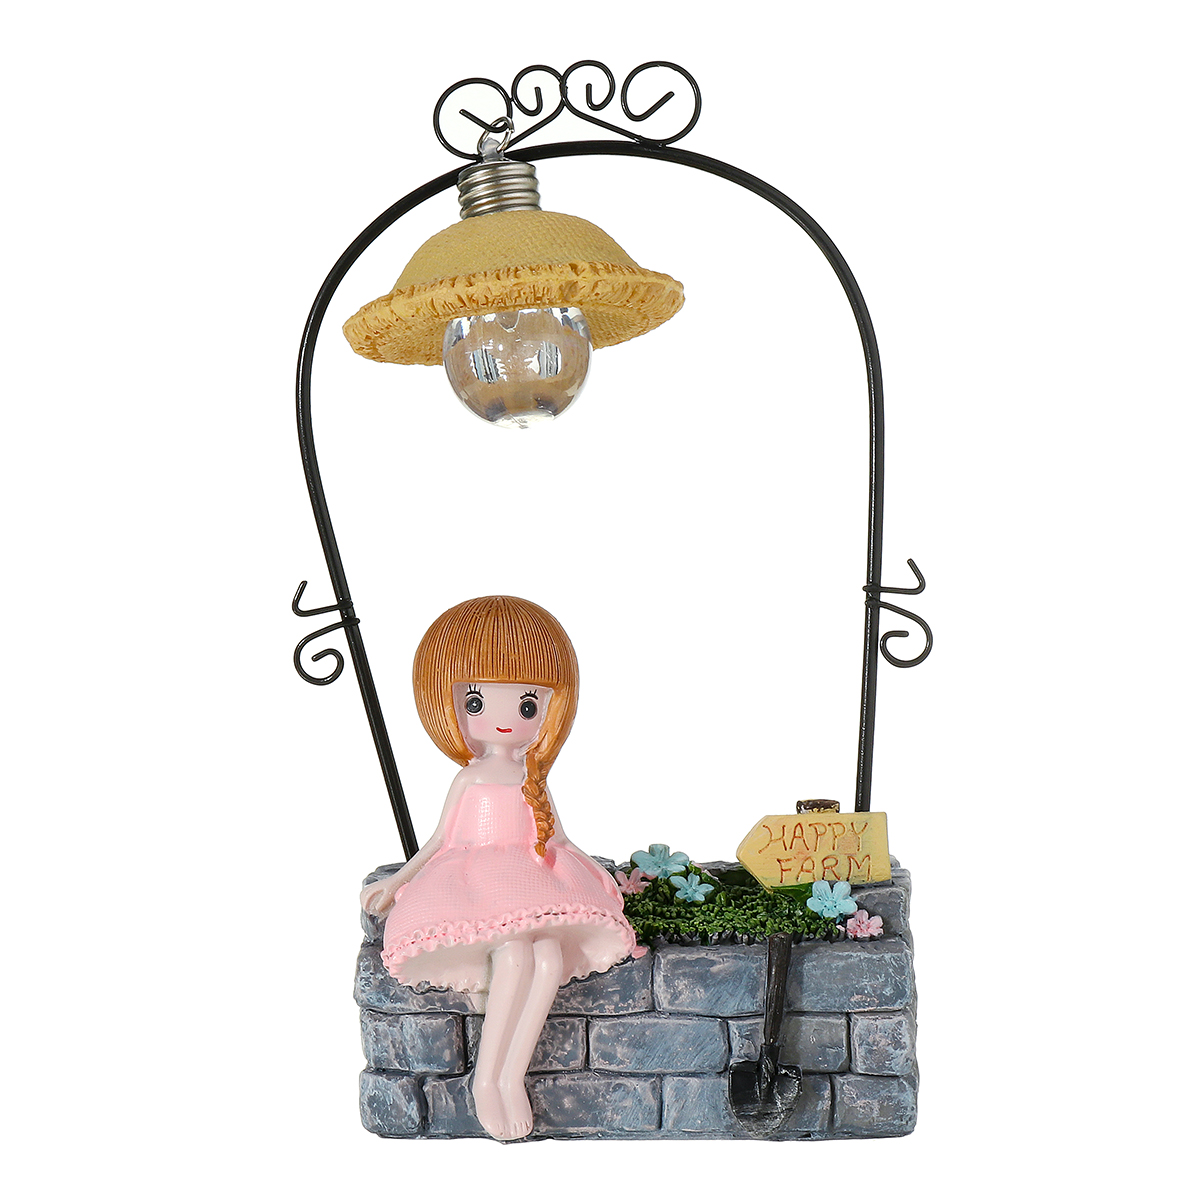 Creative-Farm-Girl-Table-Night-Light-Resin-Craft-Character-Ornaments-Xmas-Gifts-1640922-8